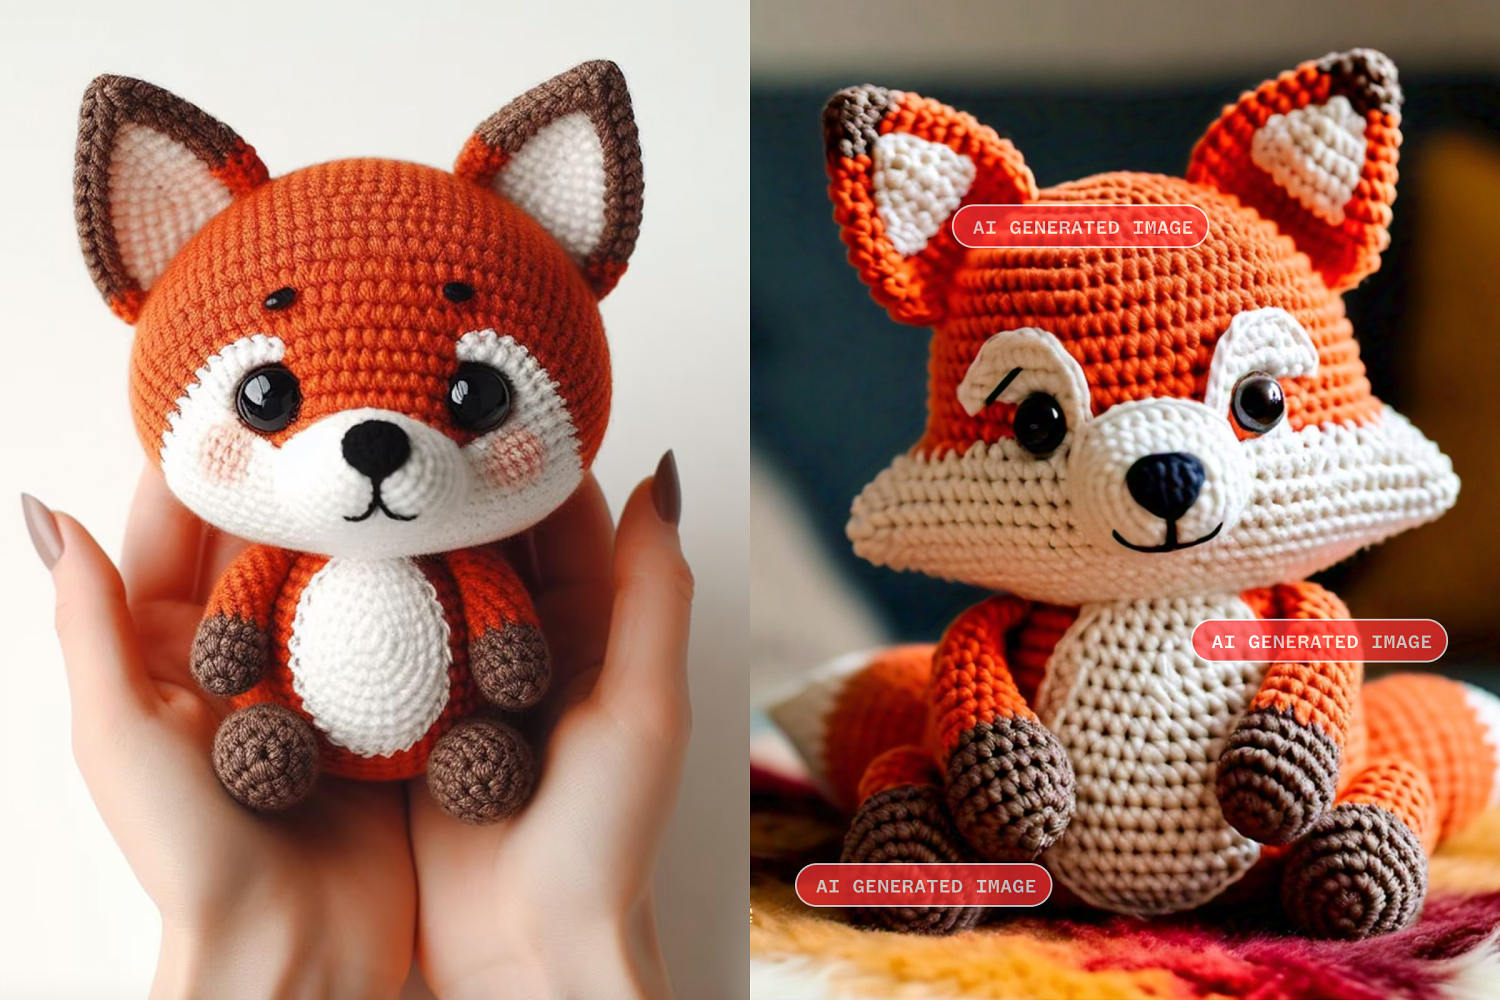 Etsy crochet buyers say AI-made images are being used to sell disappointing patterns